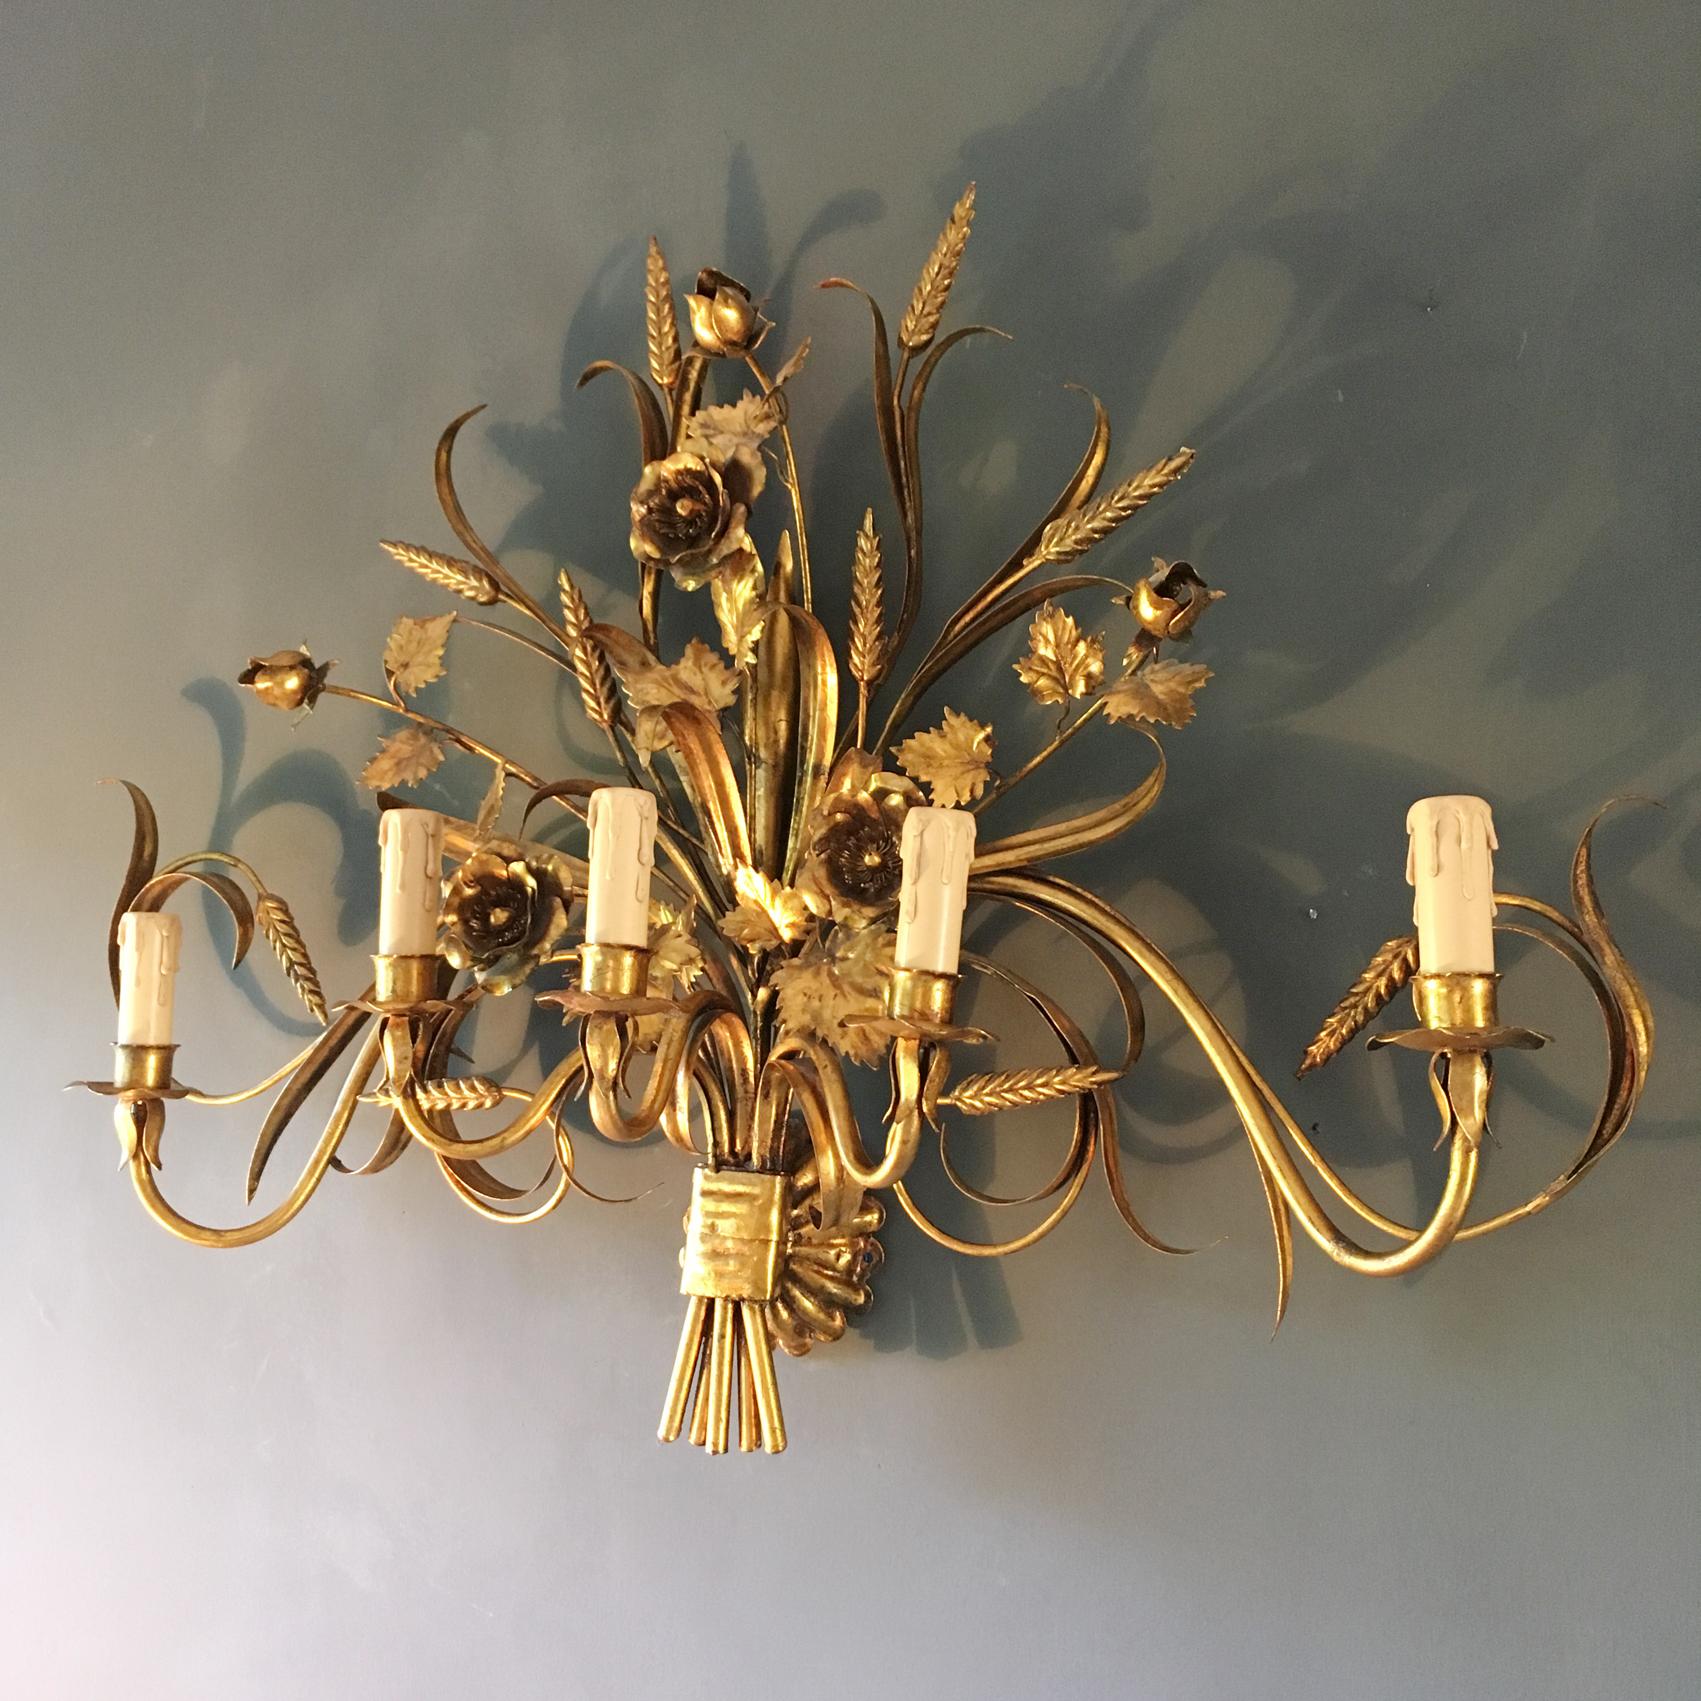 Stunning large Italian wall sconce by S.Salvadori
circa 1950s.
Gilt wheat sheaf stems, flowers, buds and leaves beautifully form the shape and surround the 5 arms
The light takes 5 x e14 small screw in bulb
Dimensions:
83 cm width
62 cm